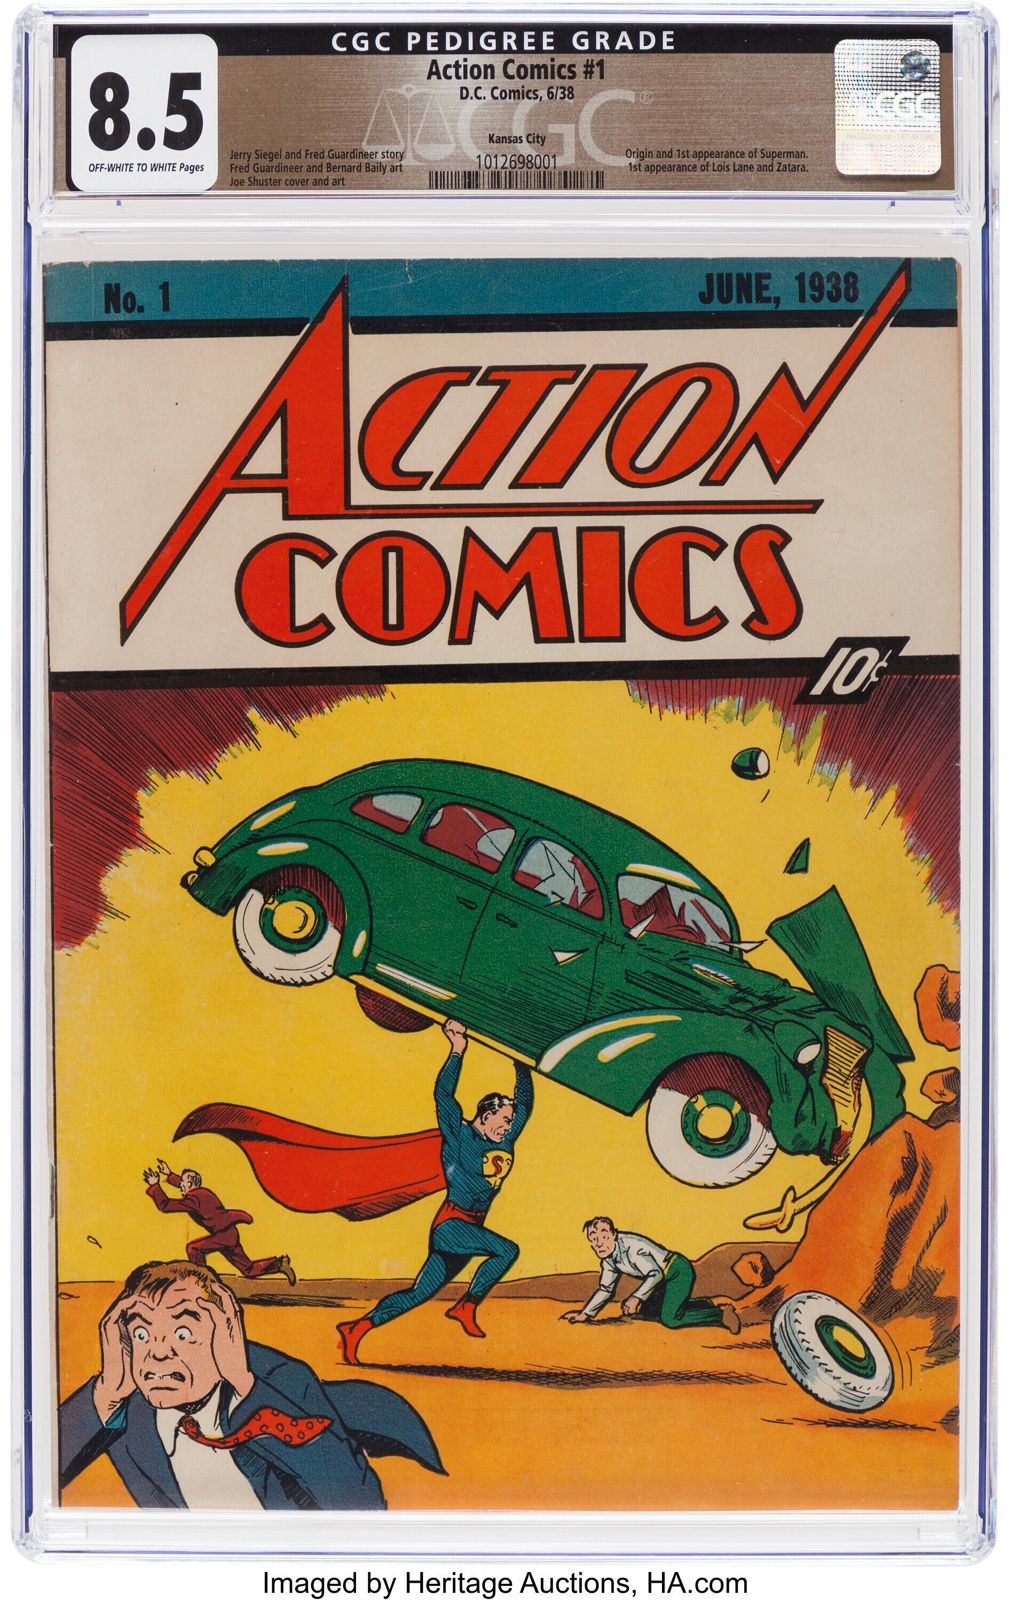 Rare copy of comic featuring Superman's debut sells for $6 million at auction